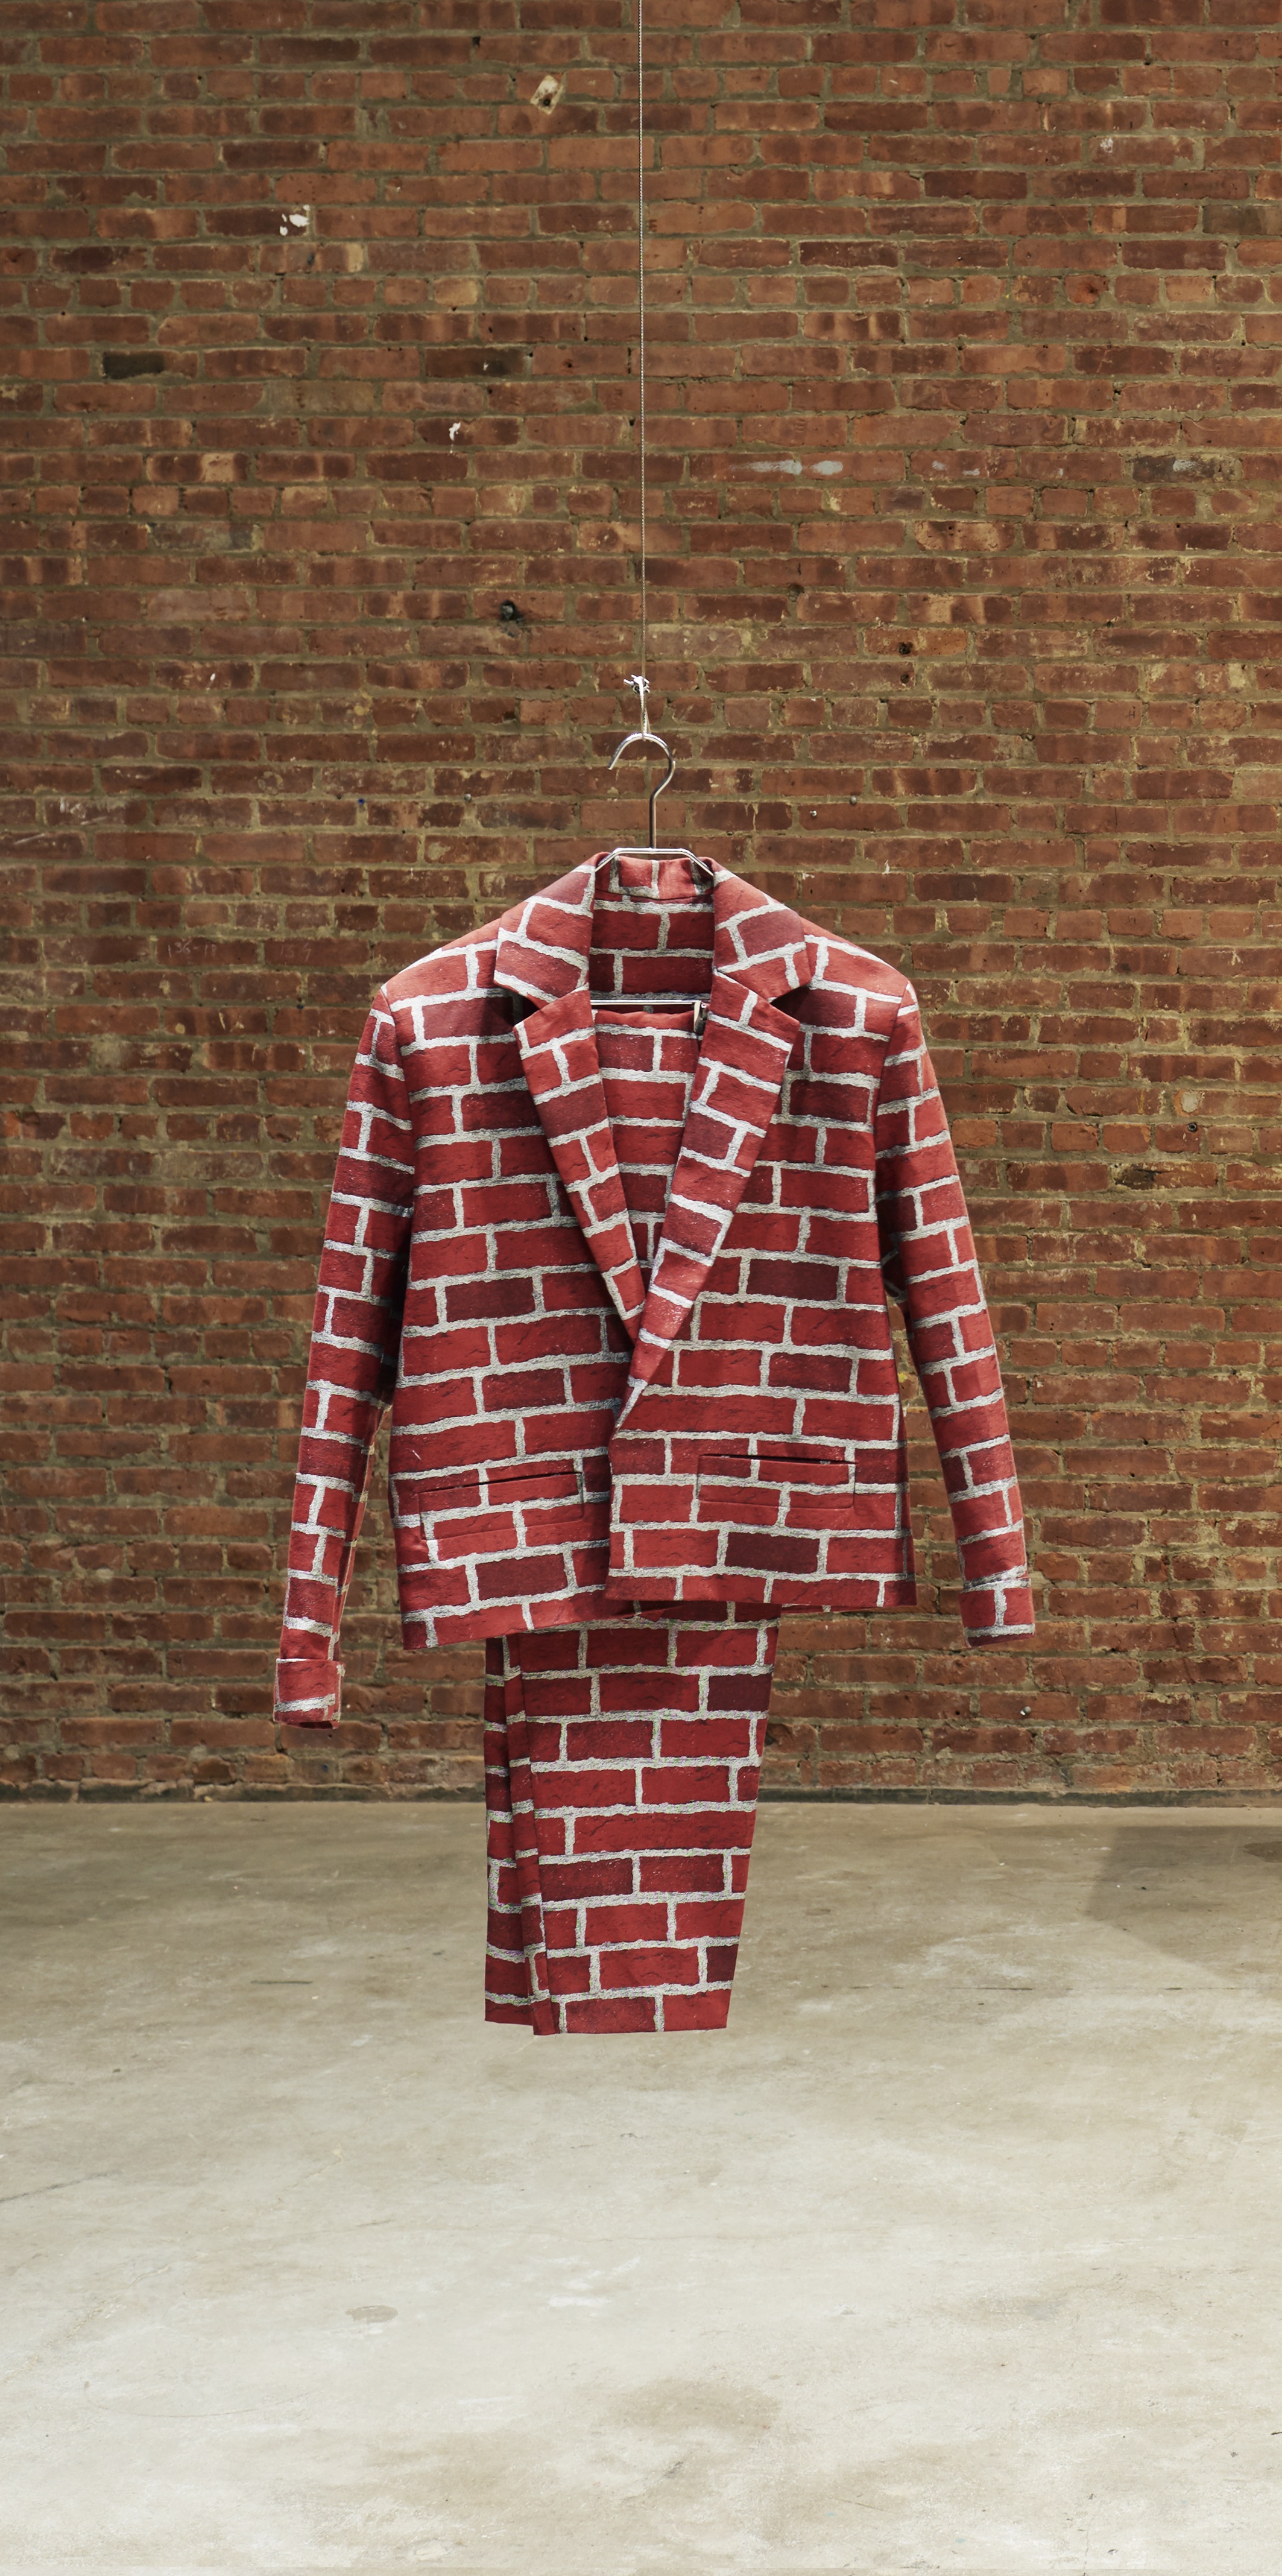 Brick Suit by Anthea Hamilton (photo by Kyle Knodell)